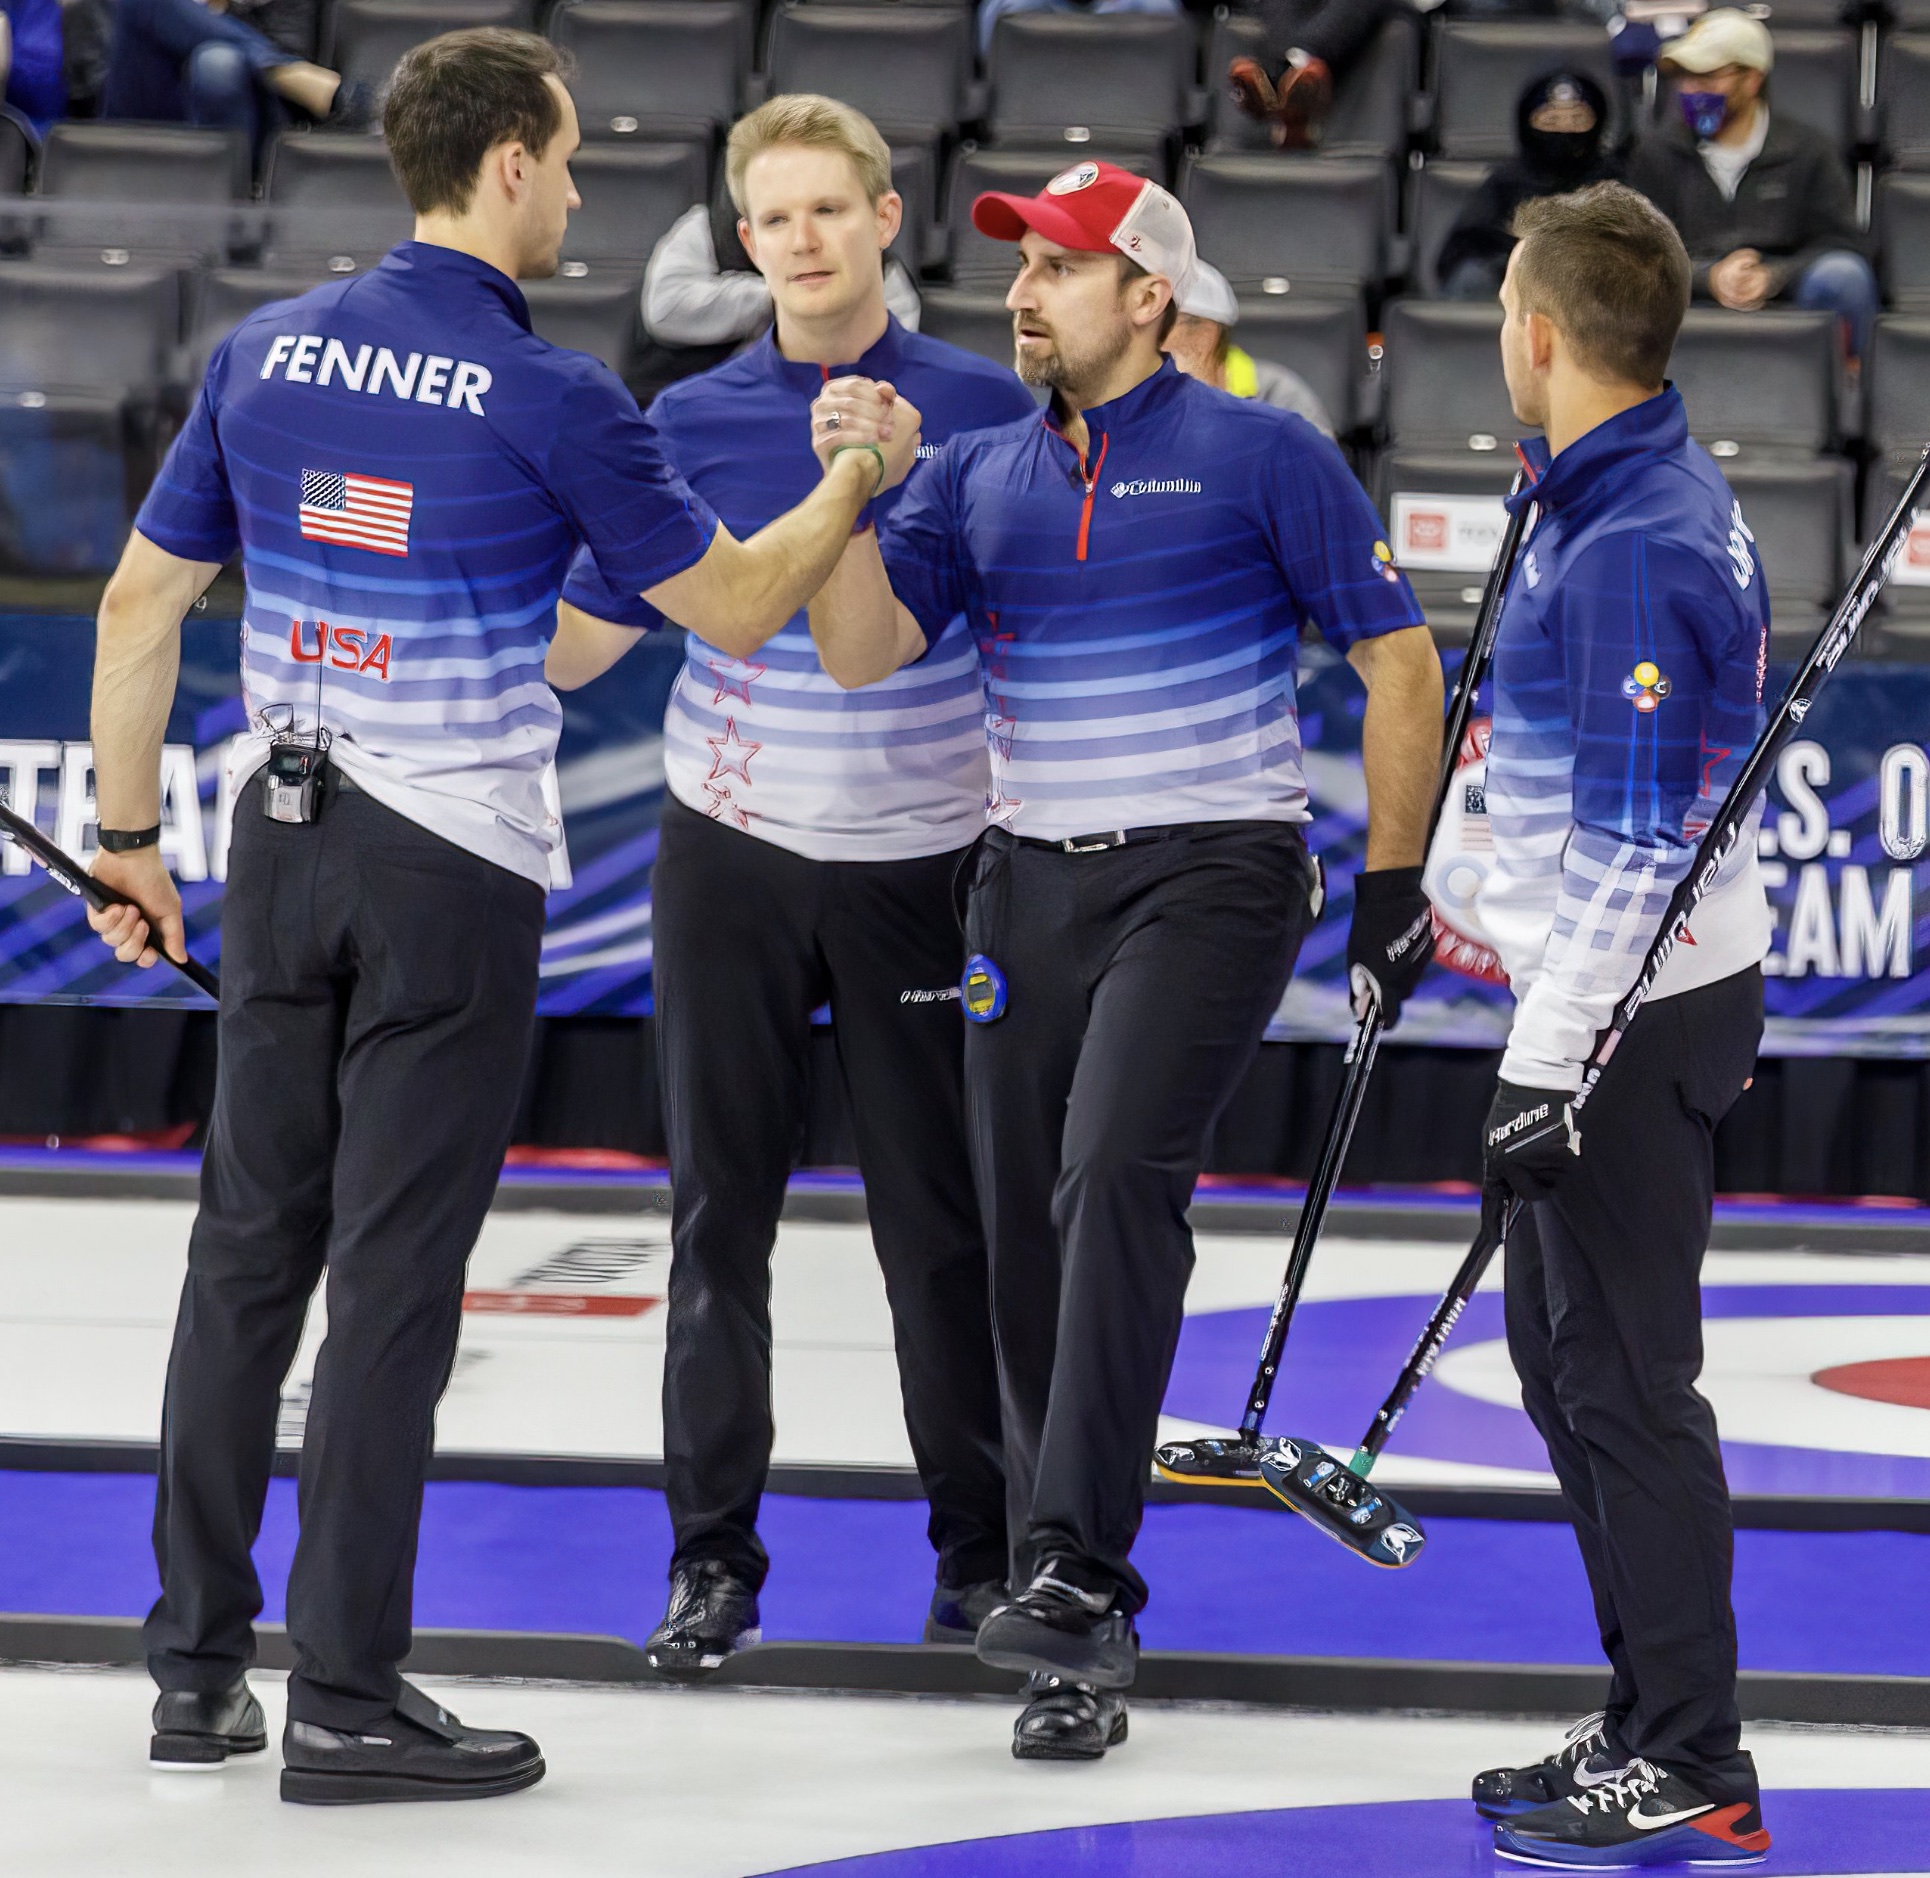 Olympic Dreams For Final Four At U S Curling Trials The Curling News